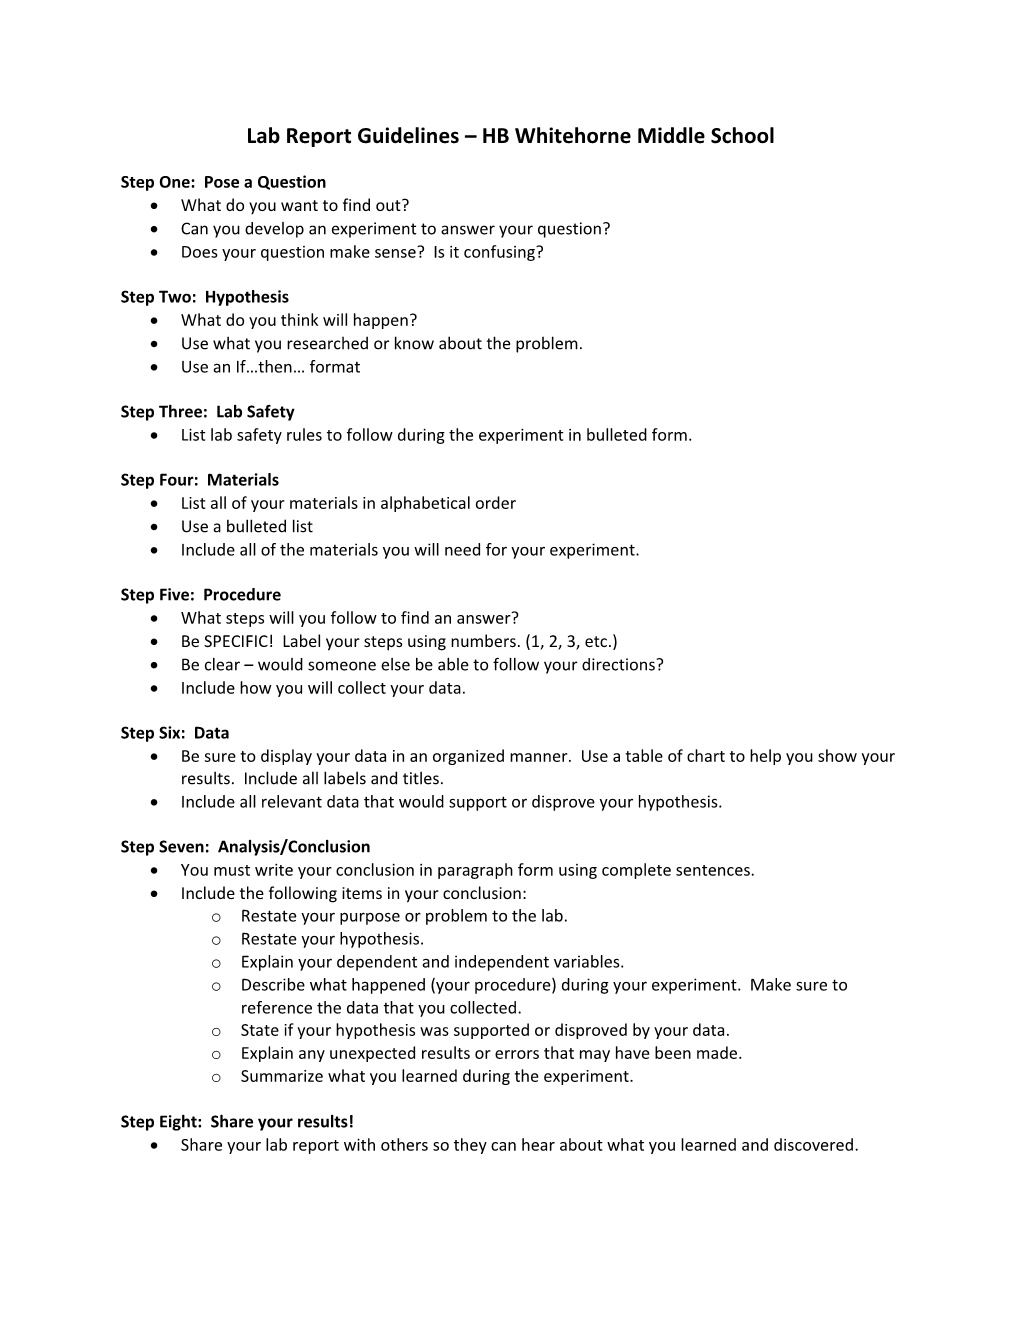 Lab Report Guidelines HB Whitehorne Middle School